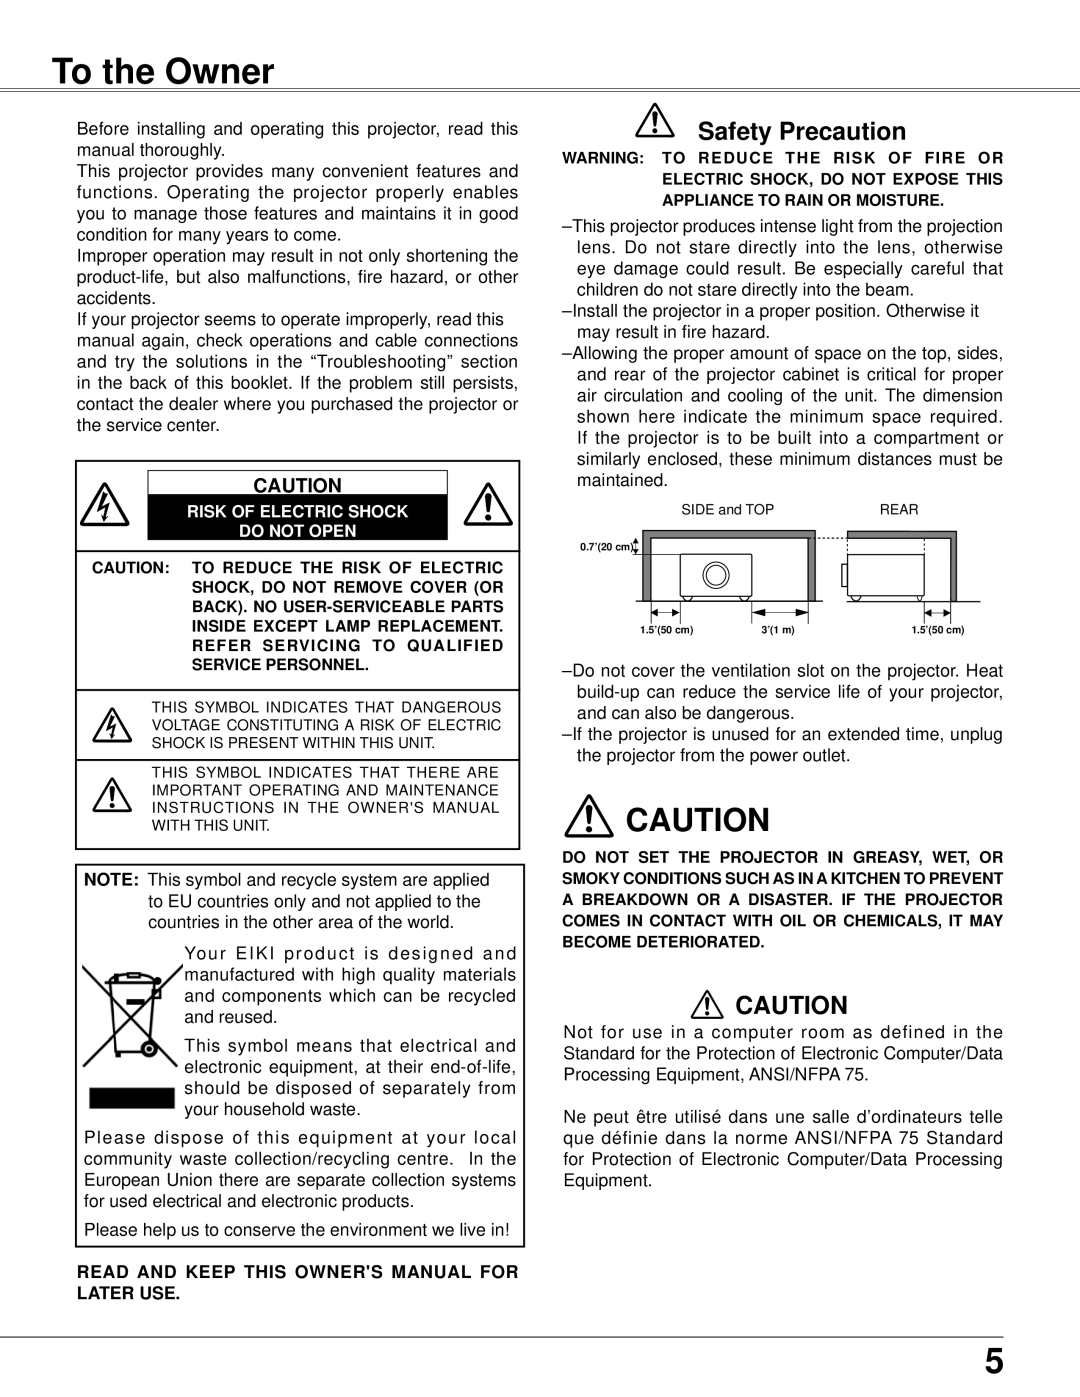 Eiki LC-XB42N owner manual To the Owner, Safety Precaution, Risk Of Electric Shock Do Not Open 